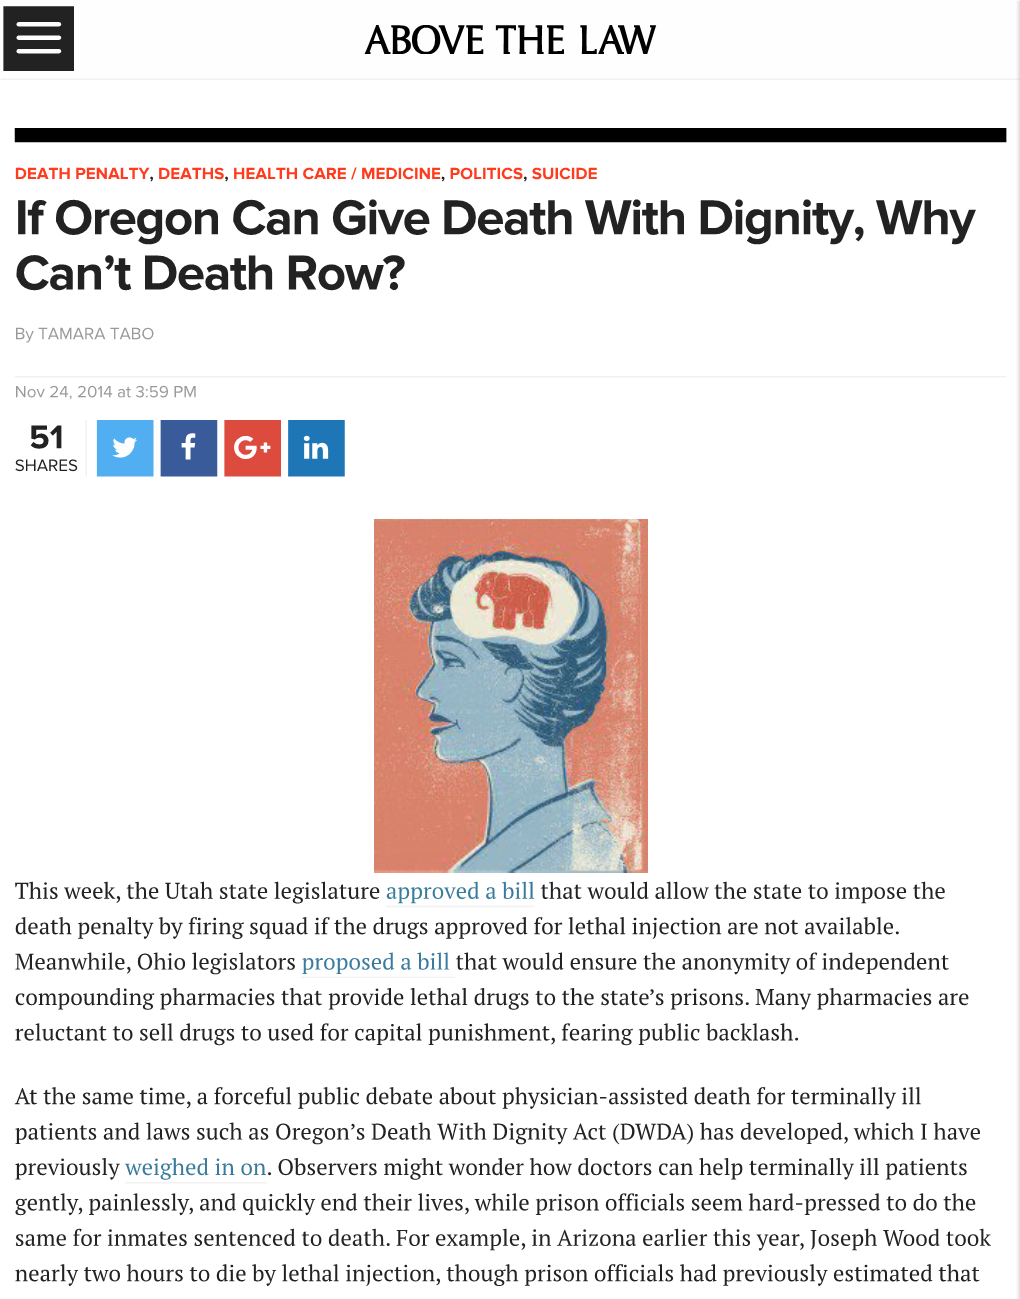 If Oregon Can Give Death with Dignity, Why Can't Death Row?